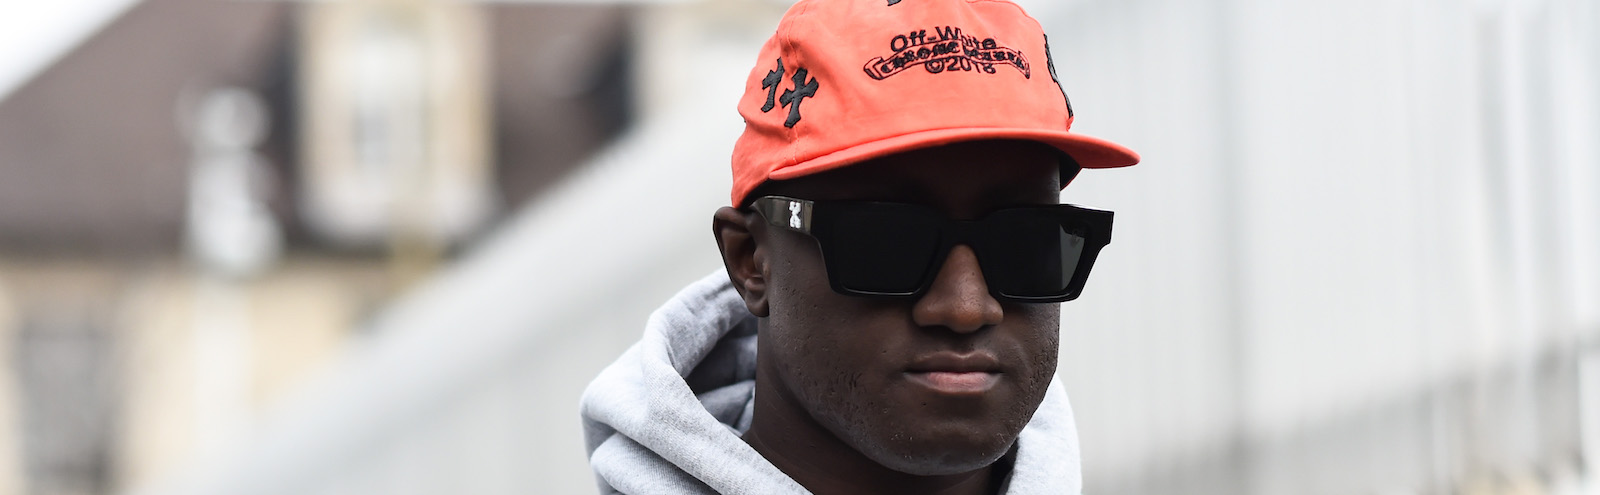 Virgil Abloh passes away after battle with cancer at 41 – USD Student Media